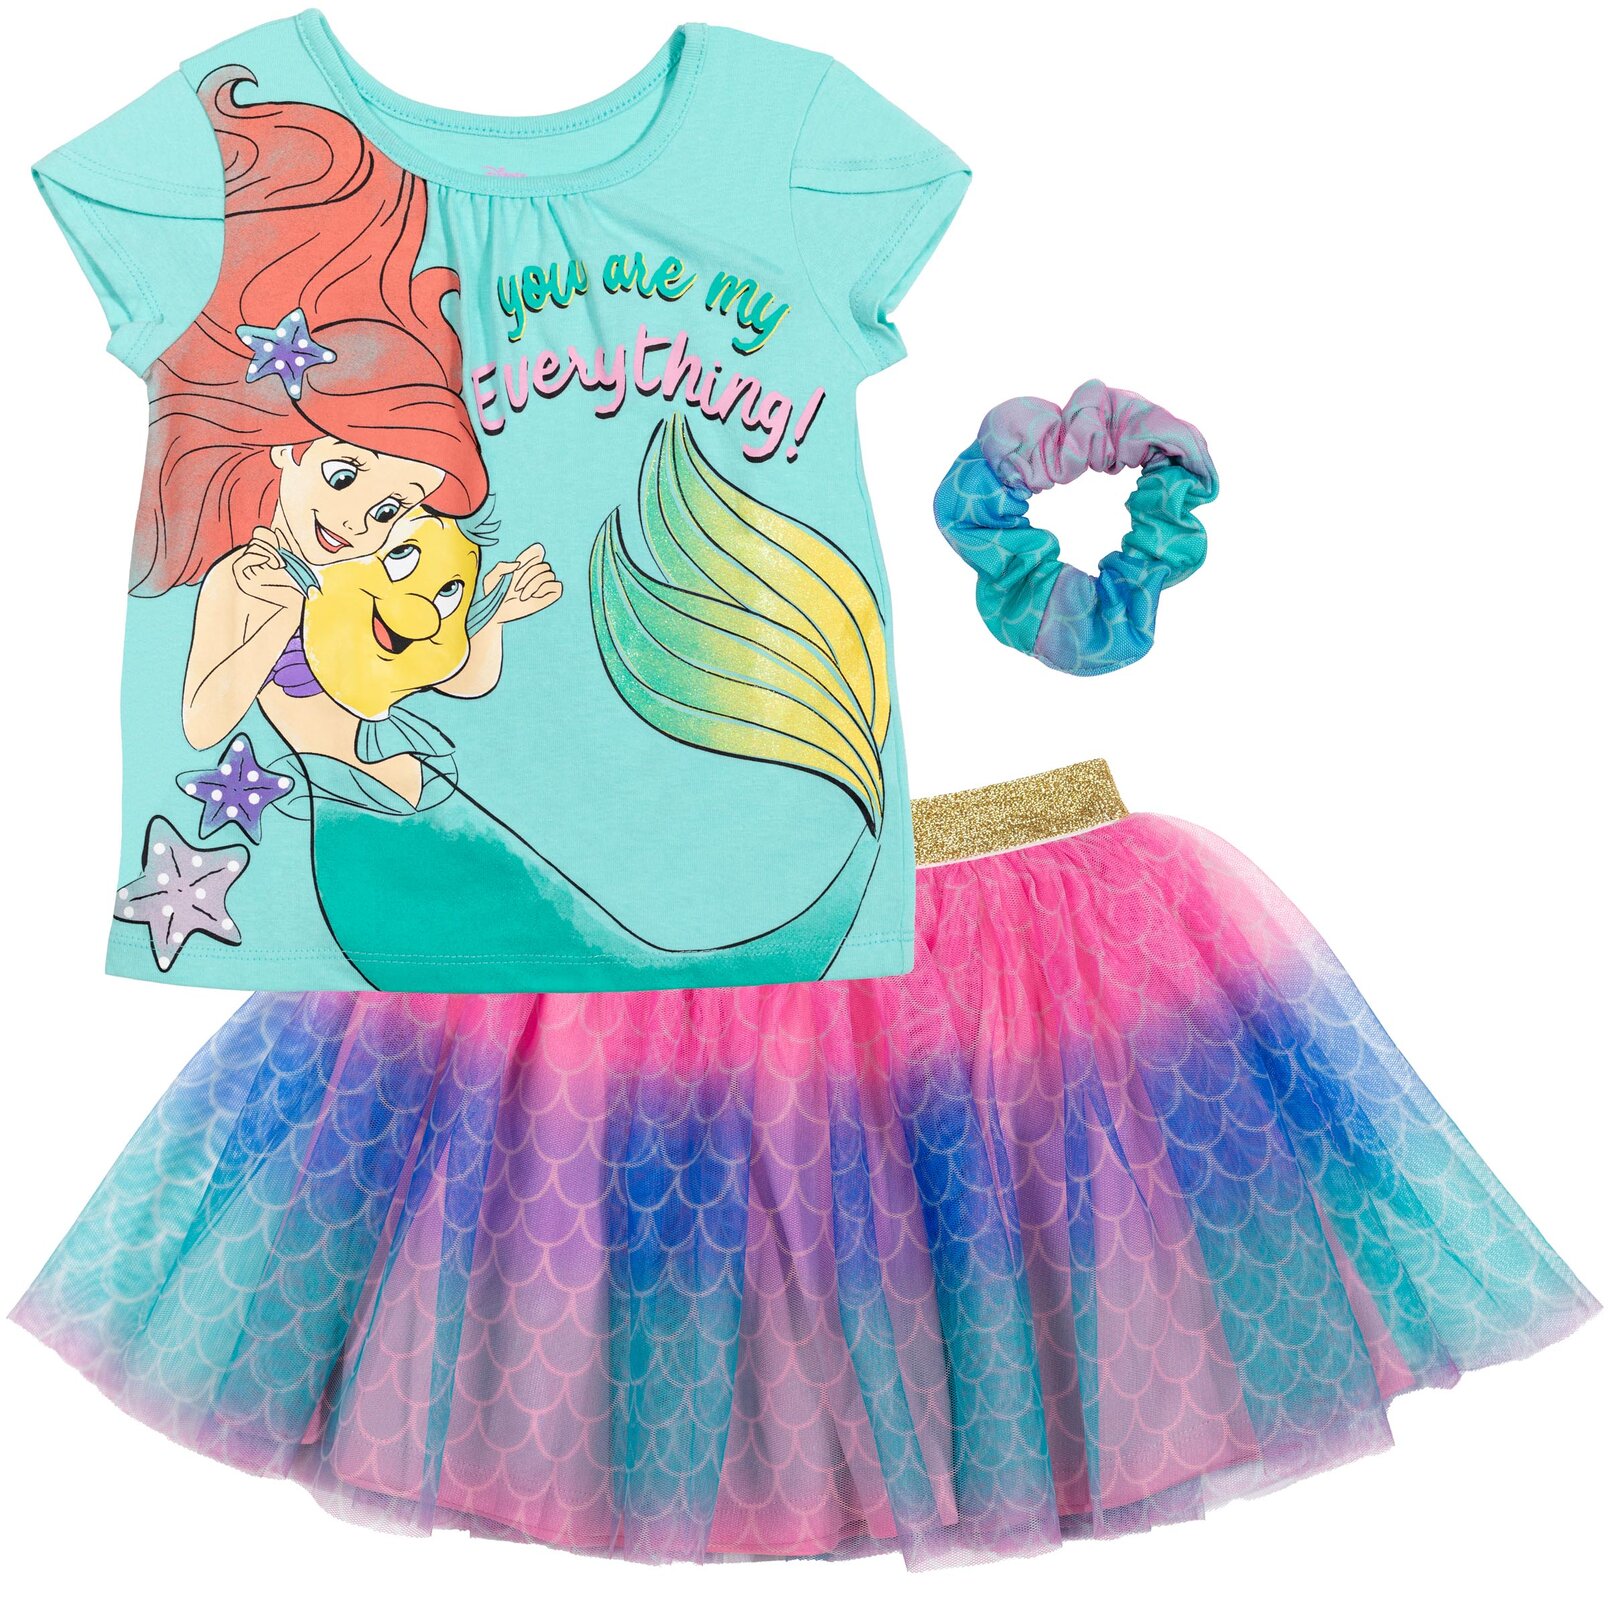 Disney Princess Ariel Little Girls T-Shirt Tulle Mesh Skirt and Scrunchie 3 Piece Outfit Set Toddler to Big Kid - image 1 of 5